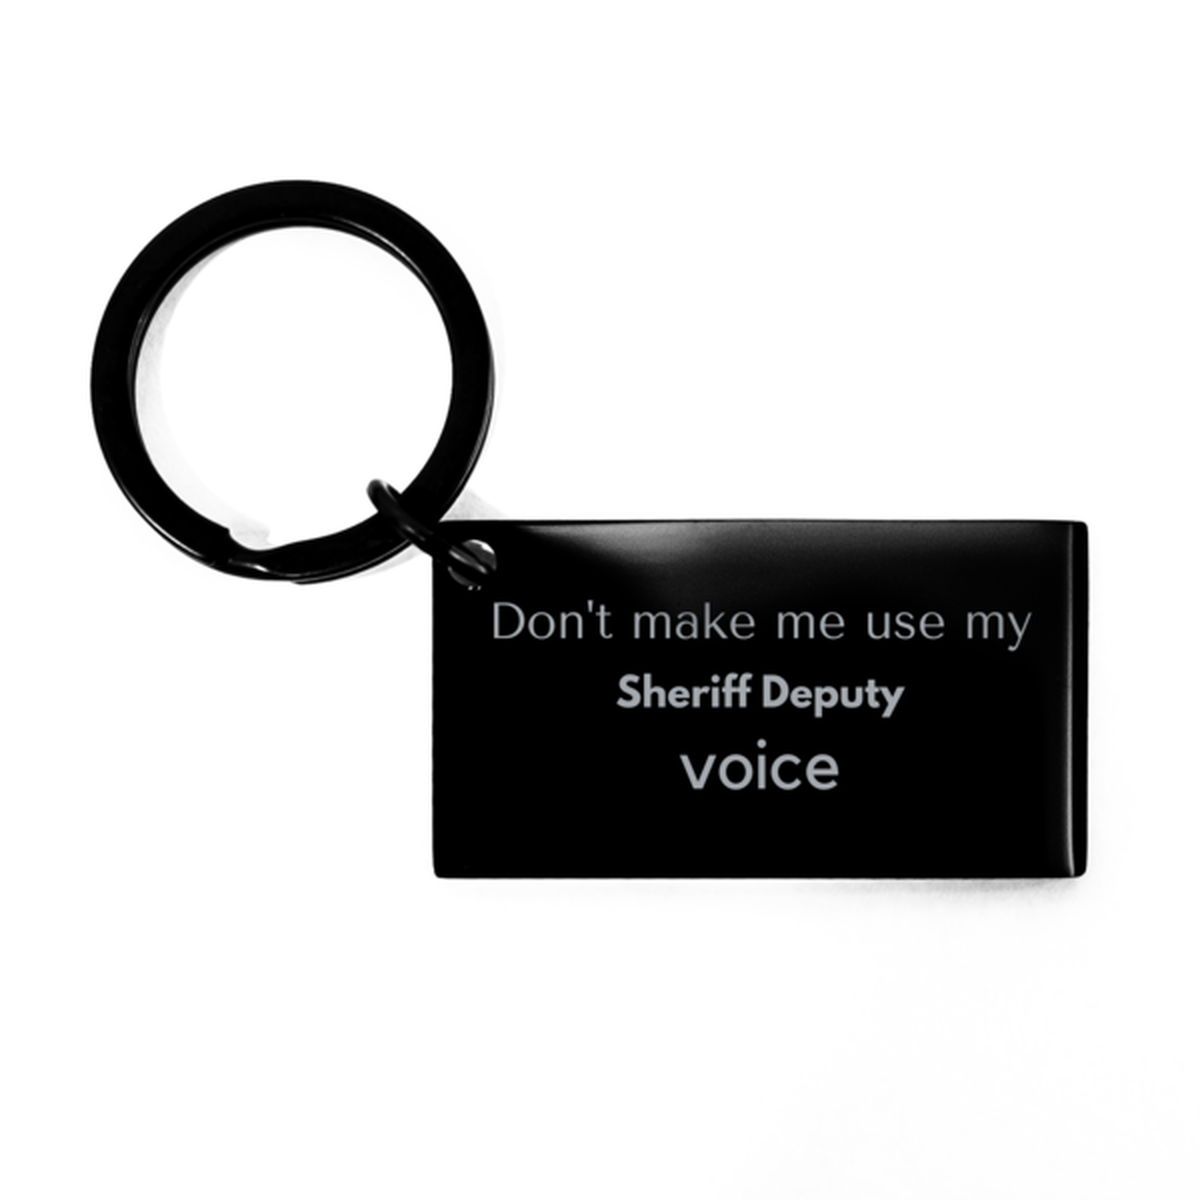 Don't make me use my Sheriff Deputy voice, Sarcasm Sheriff Deputy Gifts, Christmas Sheriff Deputy Keychain Birthday Unique Gifts For Sheriff Deputy Coworkers, Men, Women, Colleague, Friends